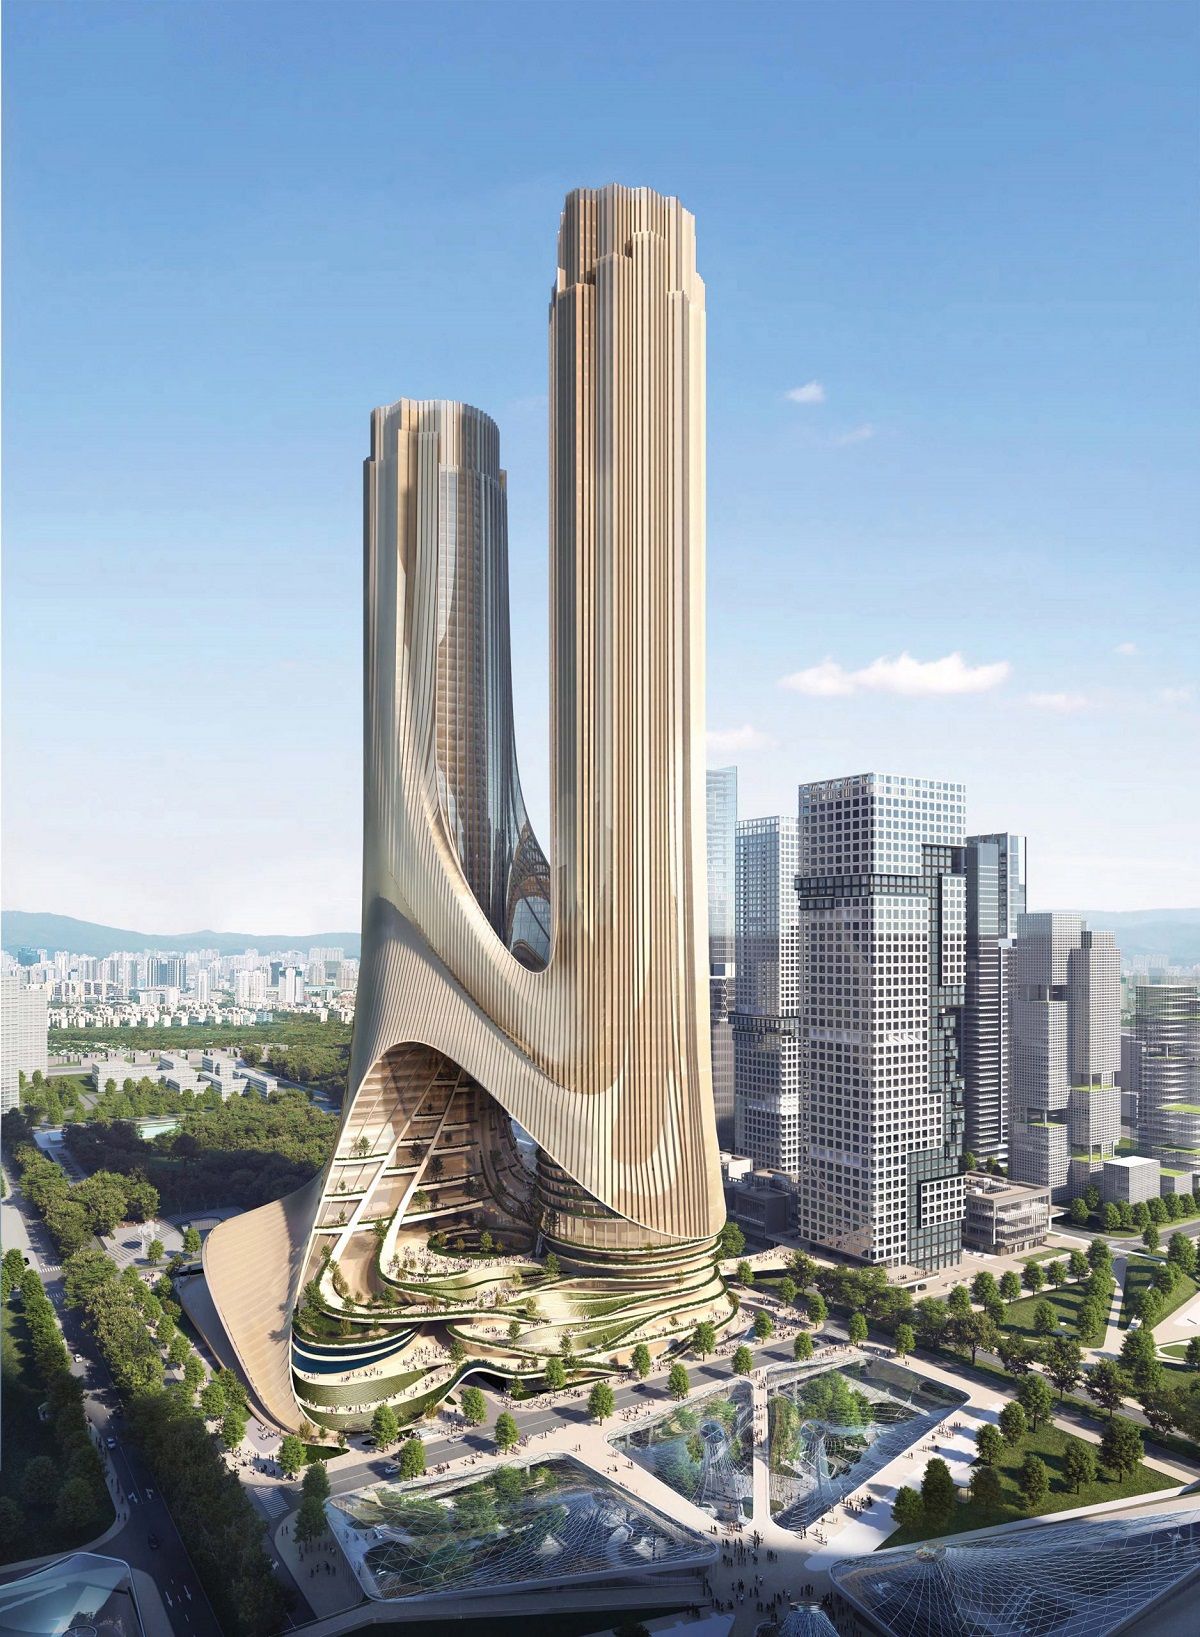 tower c zaha hadid architects shenzhen architecture supertall skyscrapers dezeen 2364 col 1 scaled 1